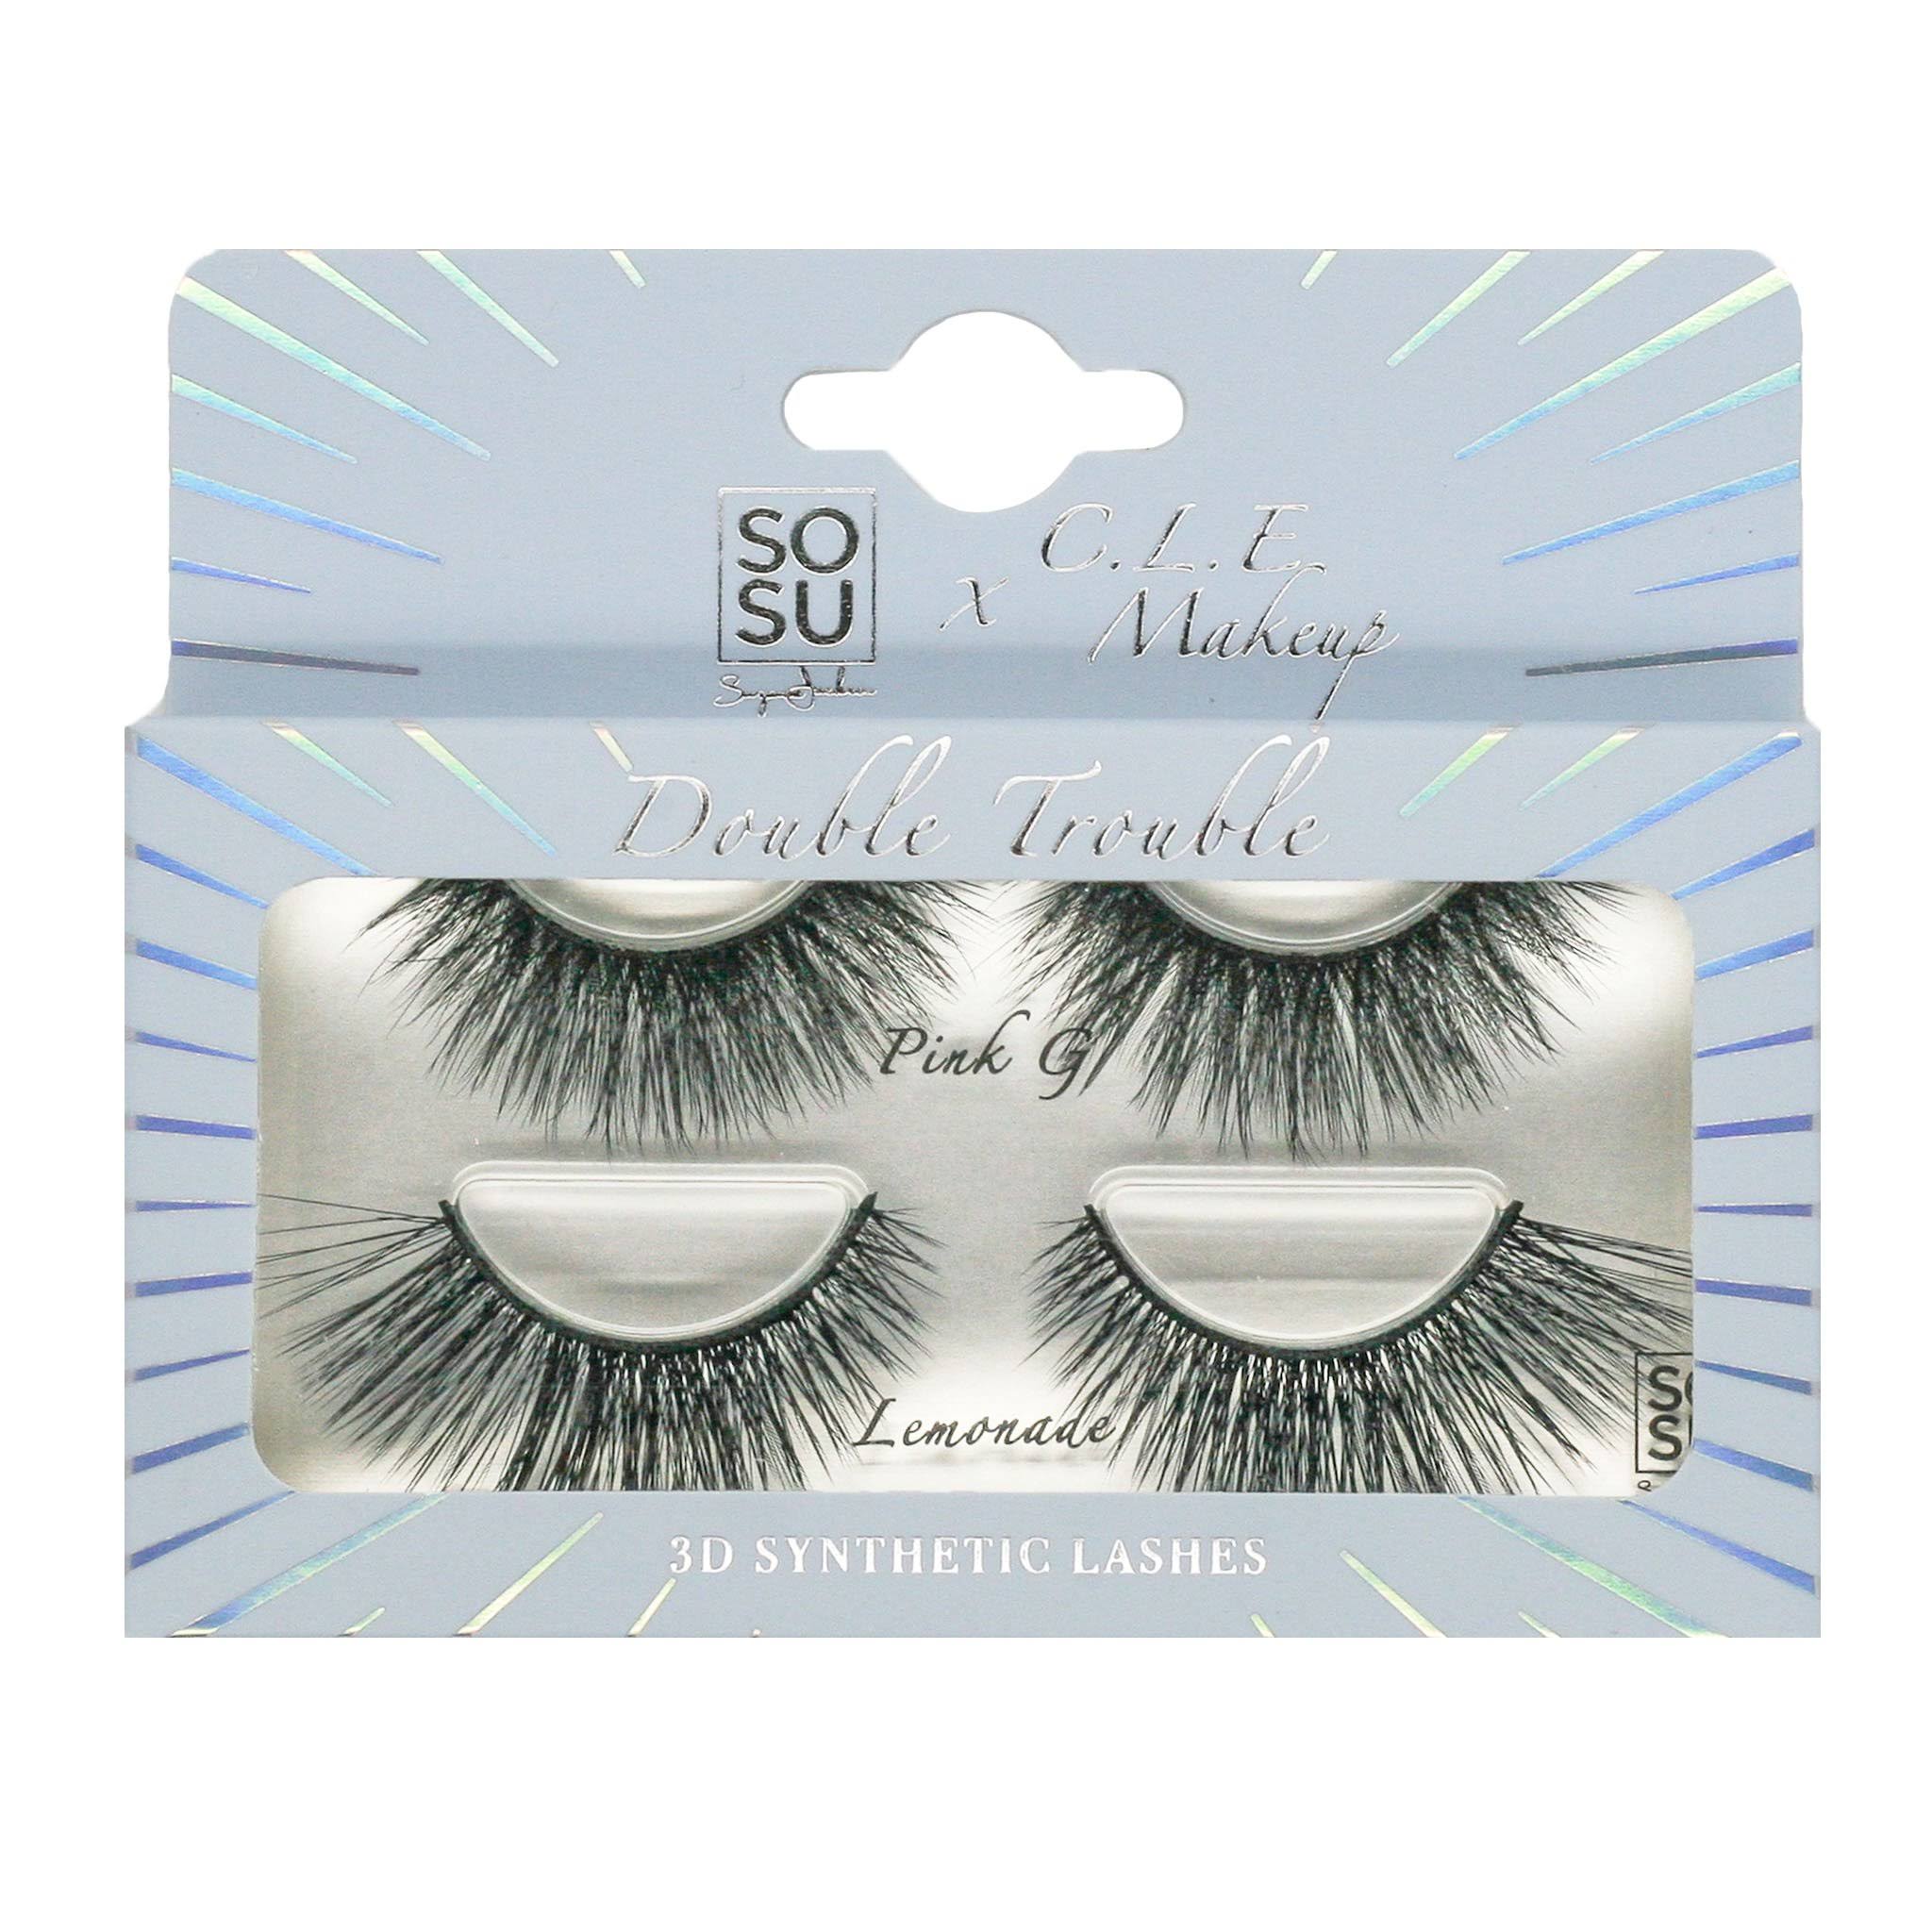 SOSU Cosmetics Cle Double Trouble 2 Pack Lashes 13.5g